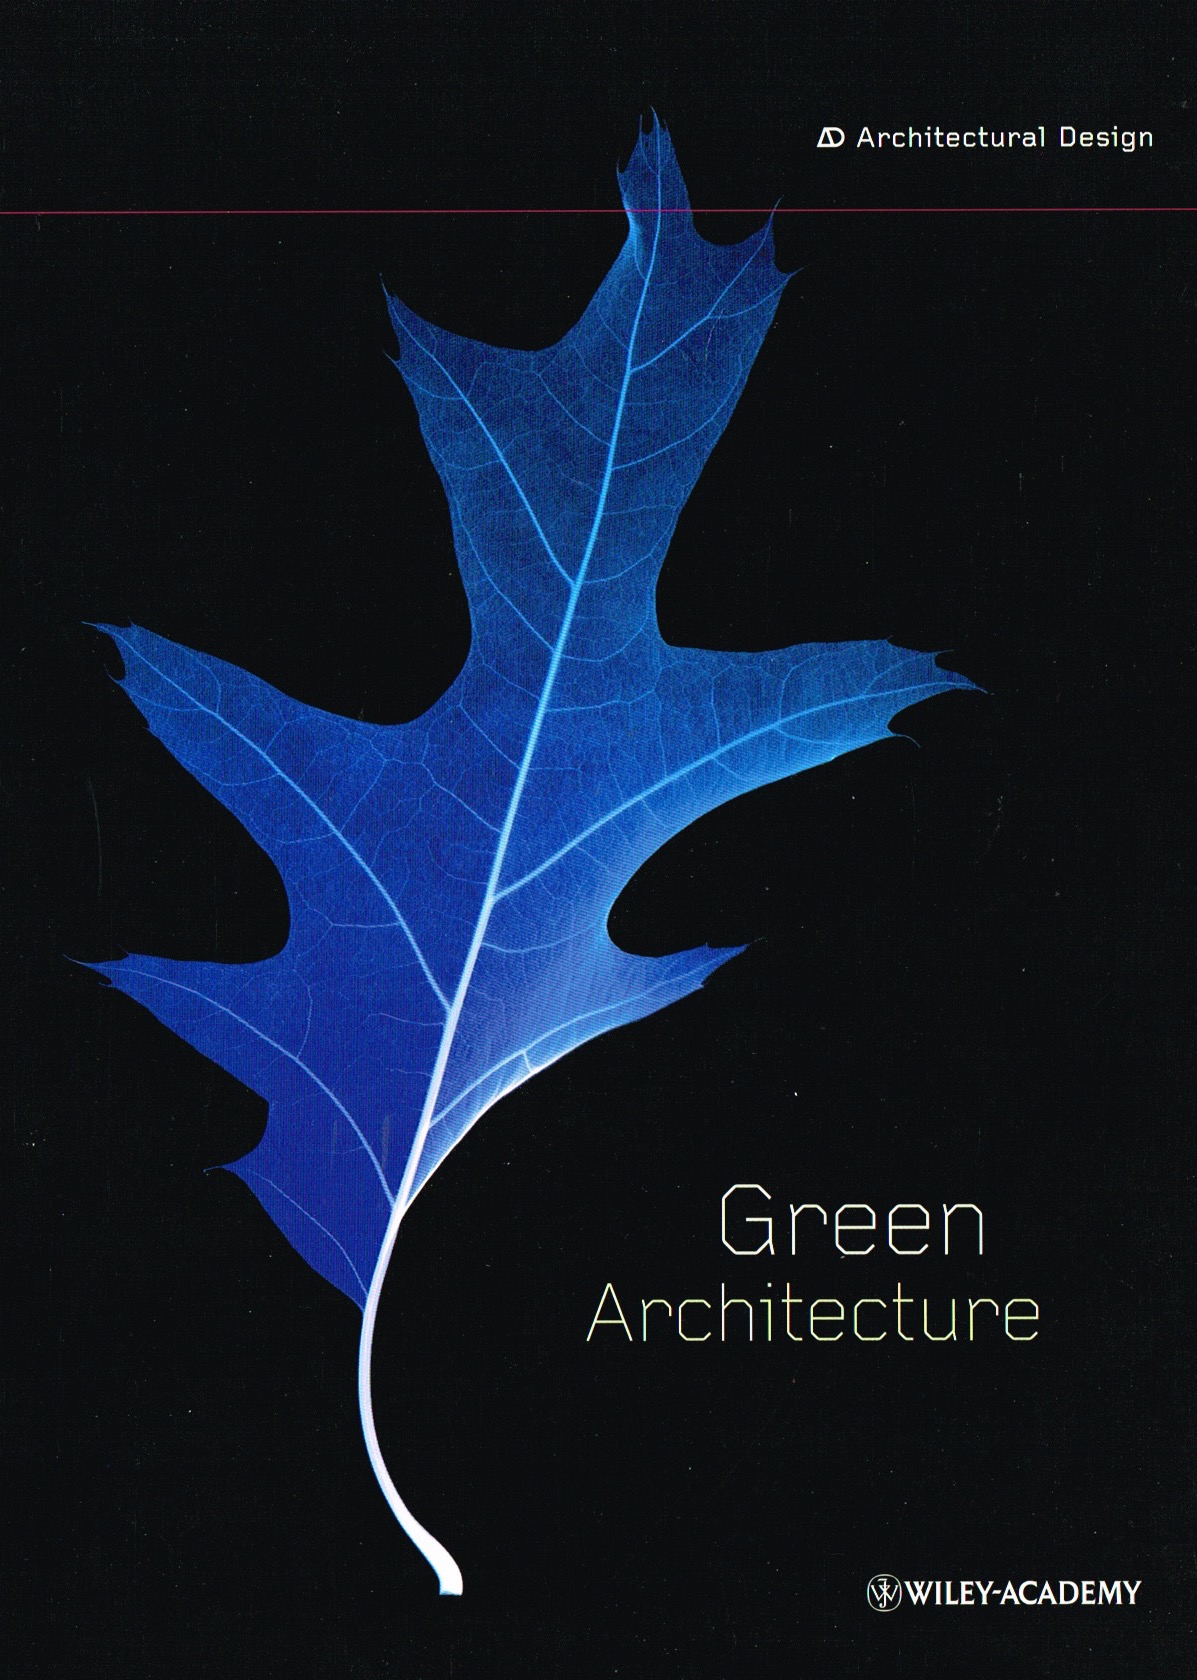 'AD Green Architecture' : Wiley Academy, London, 2001